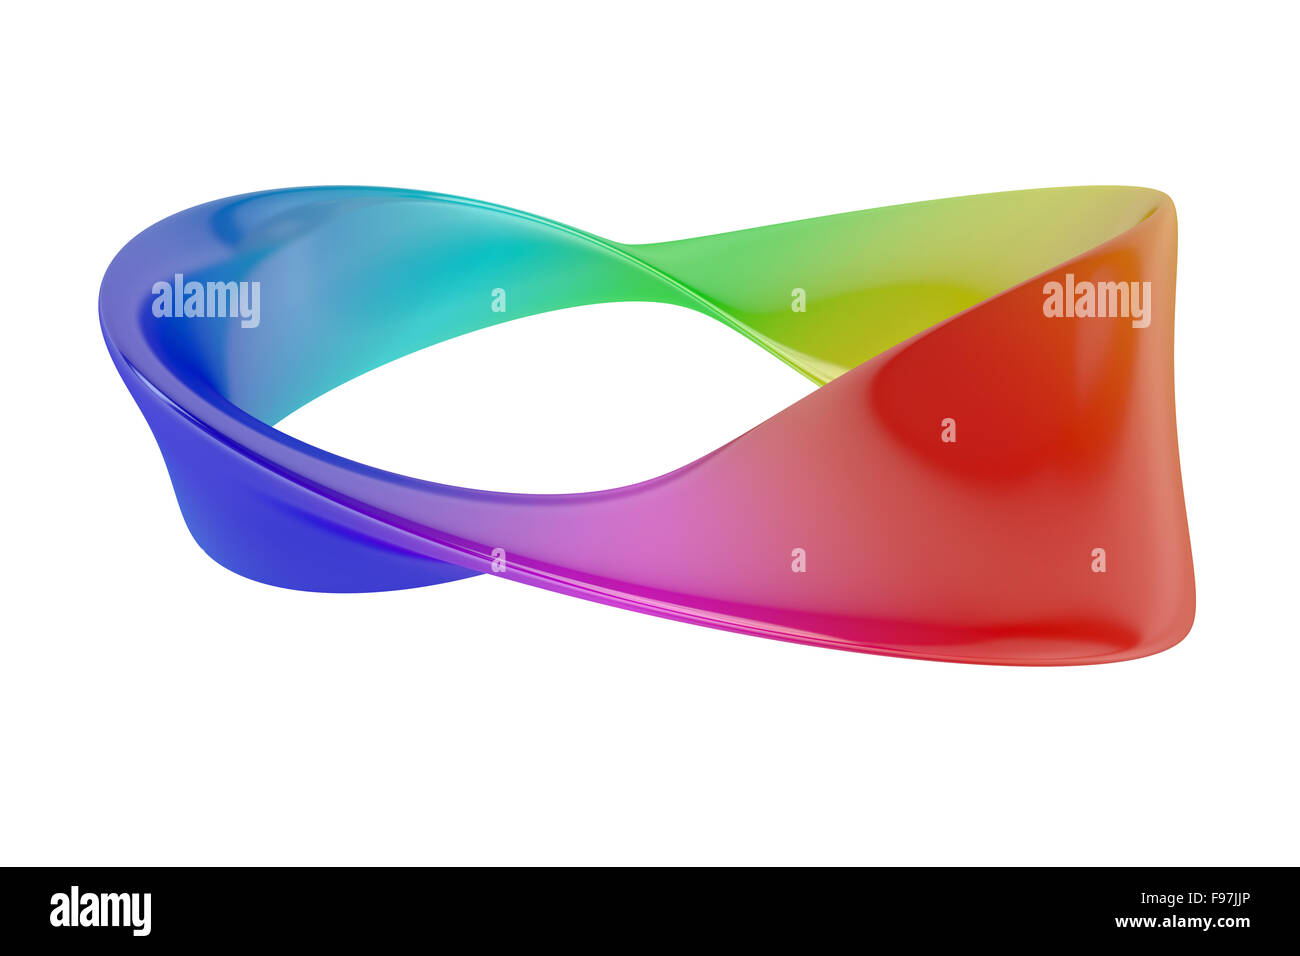 Mobius or Moebius strip isolated on white background Stock Photo